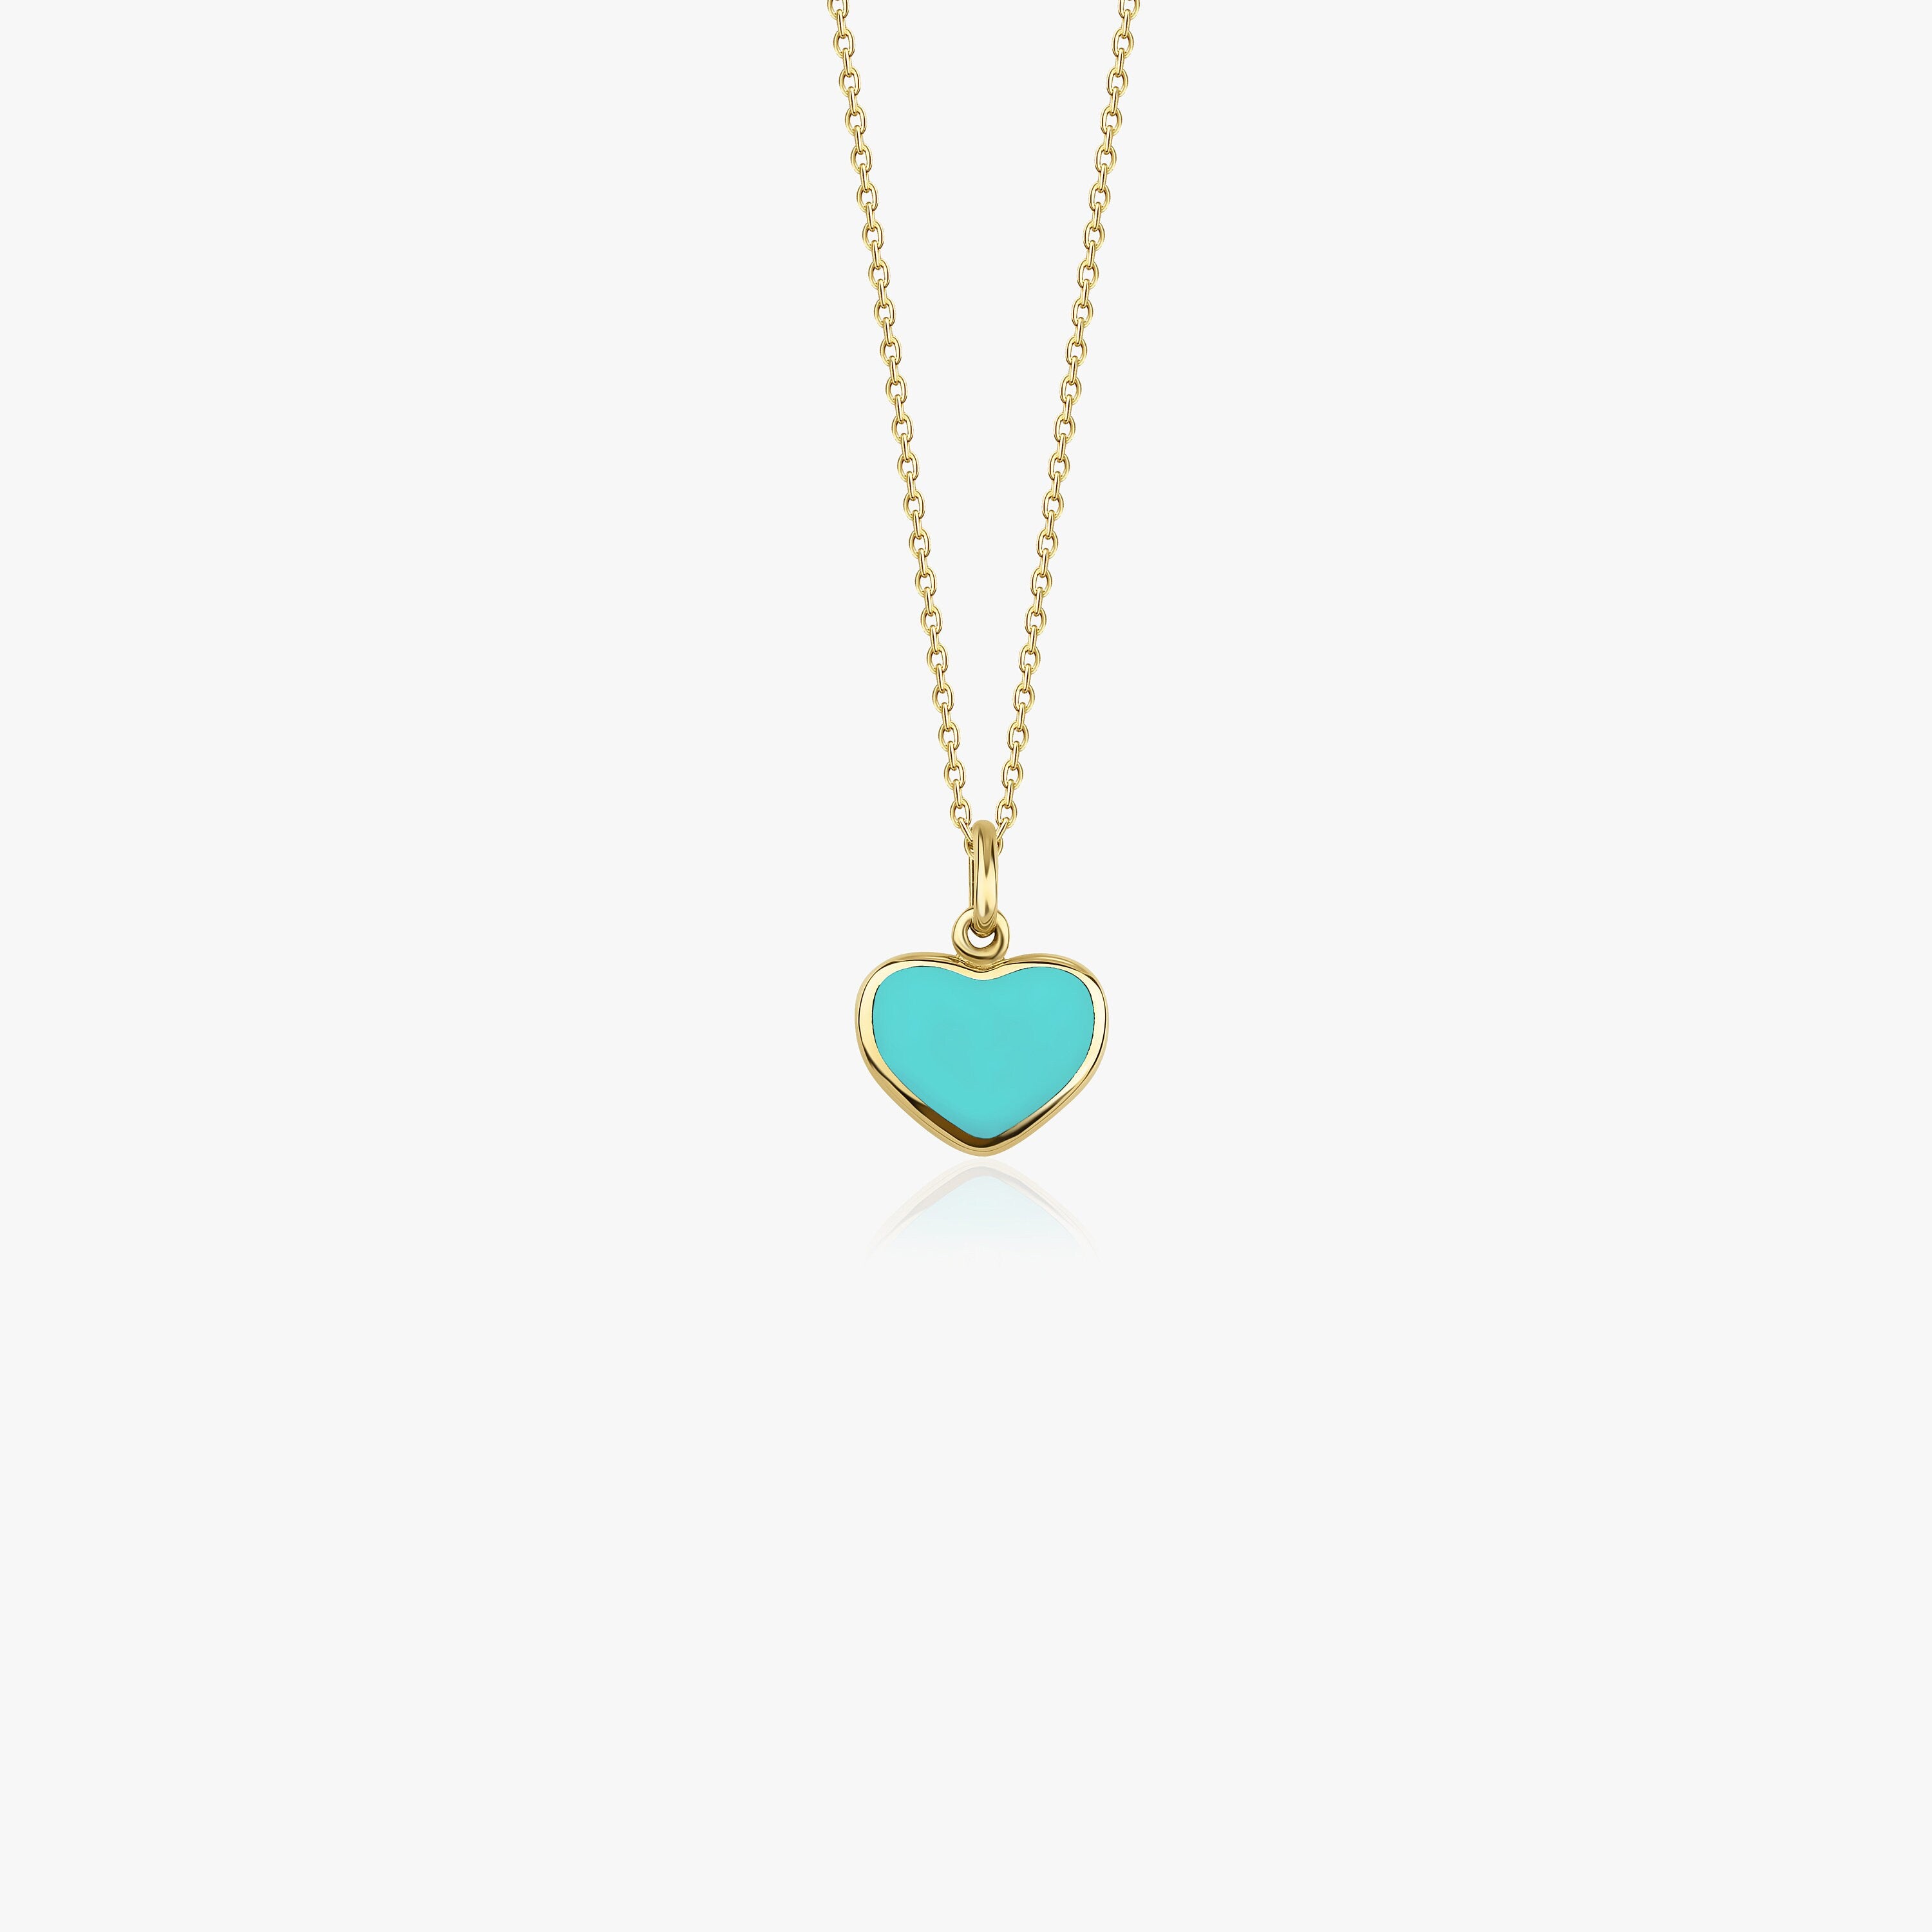 14K Gold Turquoise Heart Pendant Necklace